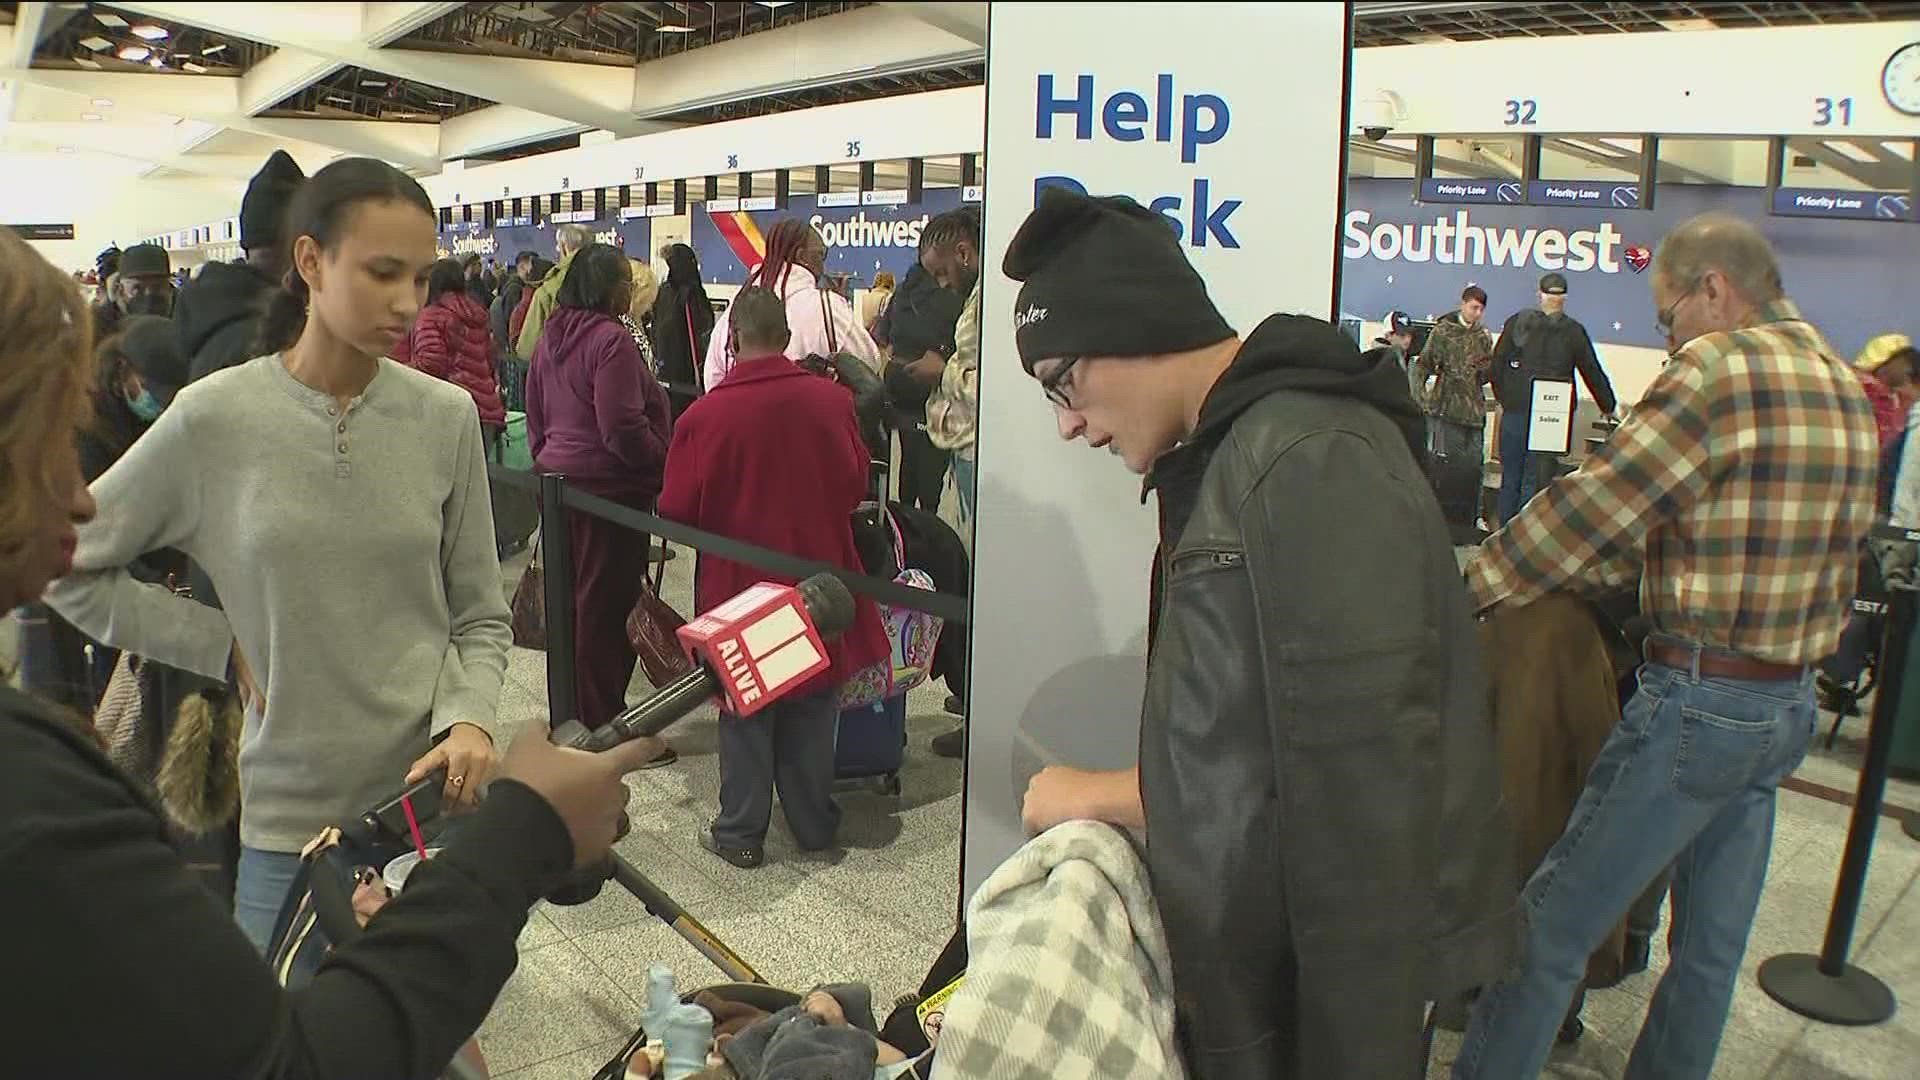 The chaos is dragging on for some travelers hoping to fly in-and-out of Atlanta's Hartsfield-Jackson International Airport across the country.